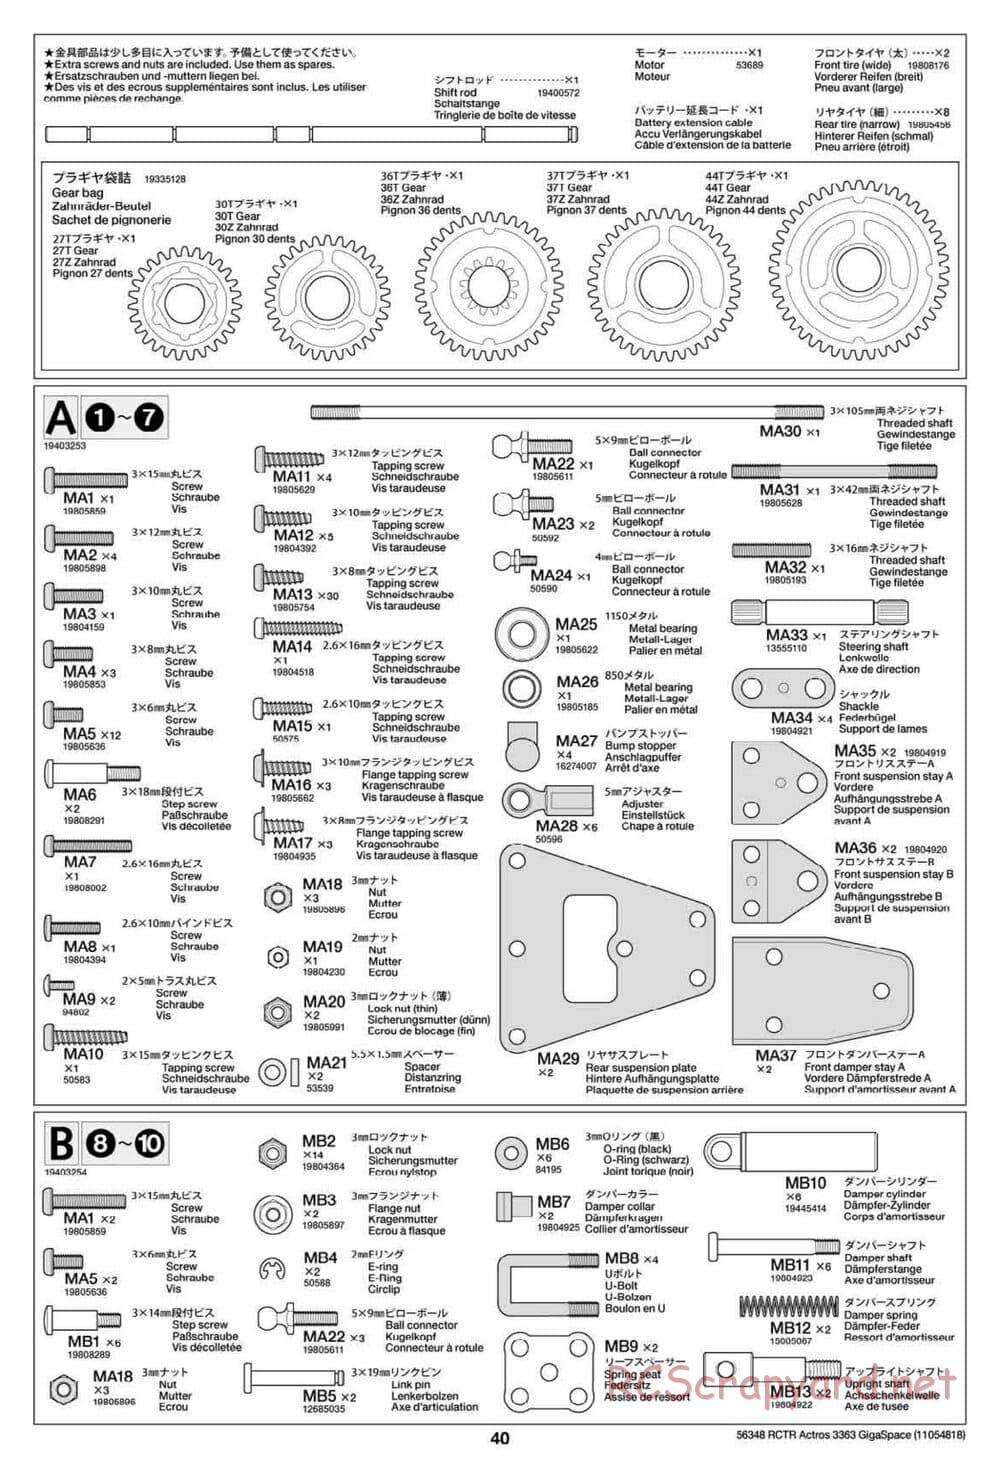 Tamiya - Mercedes-Benz Actros 3363 6x4 GigaSpace Tractor Truck Chassis - Manual - Page 40